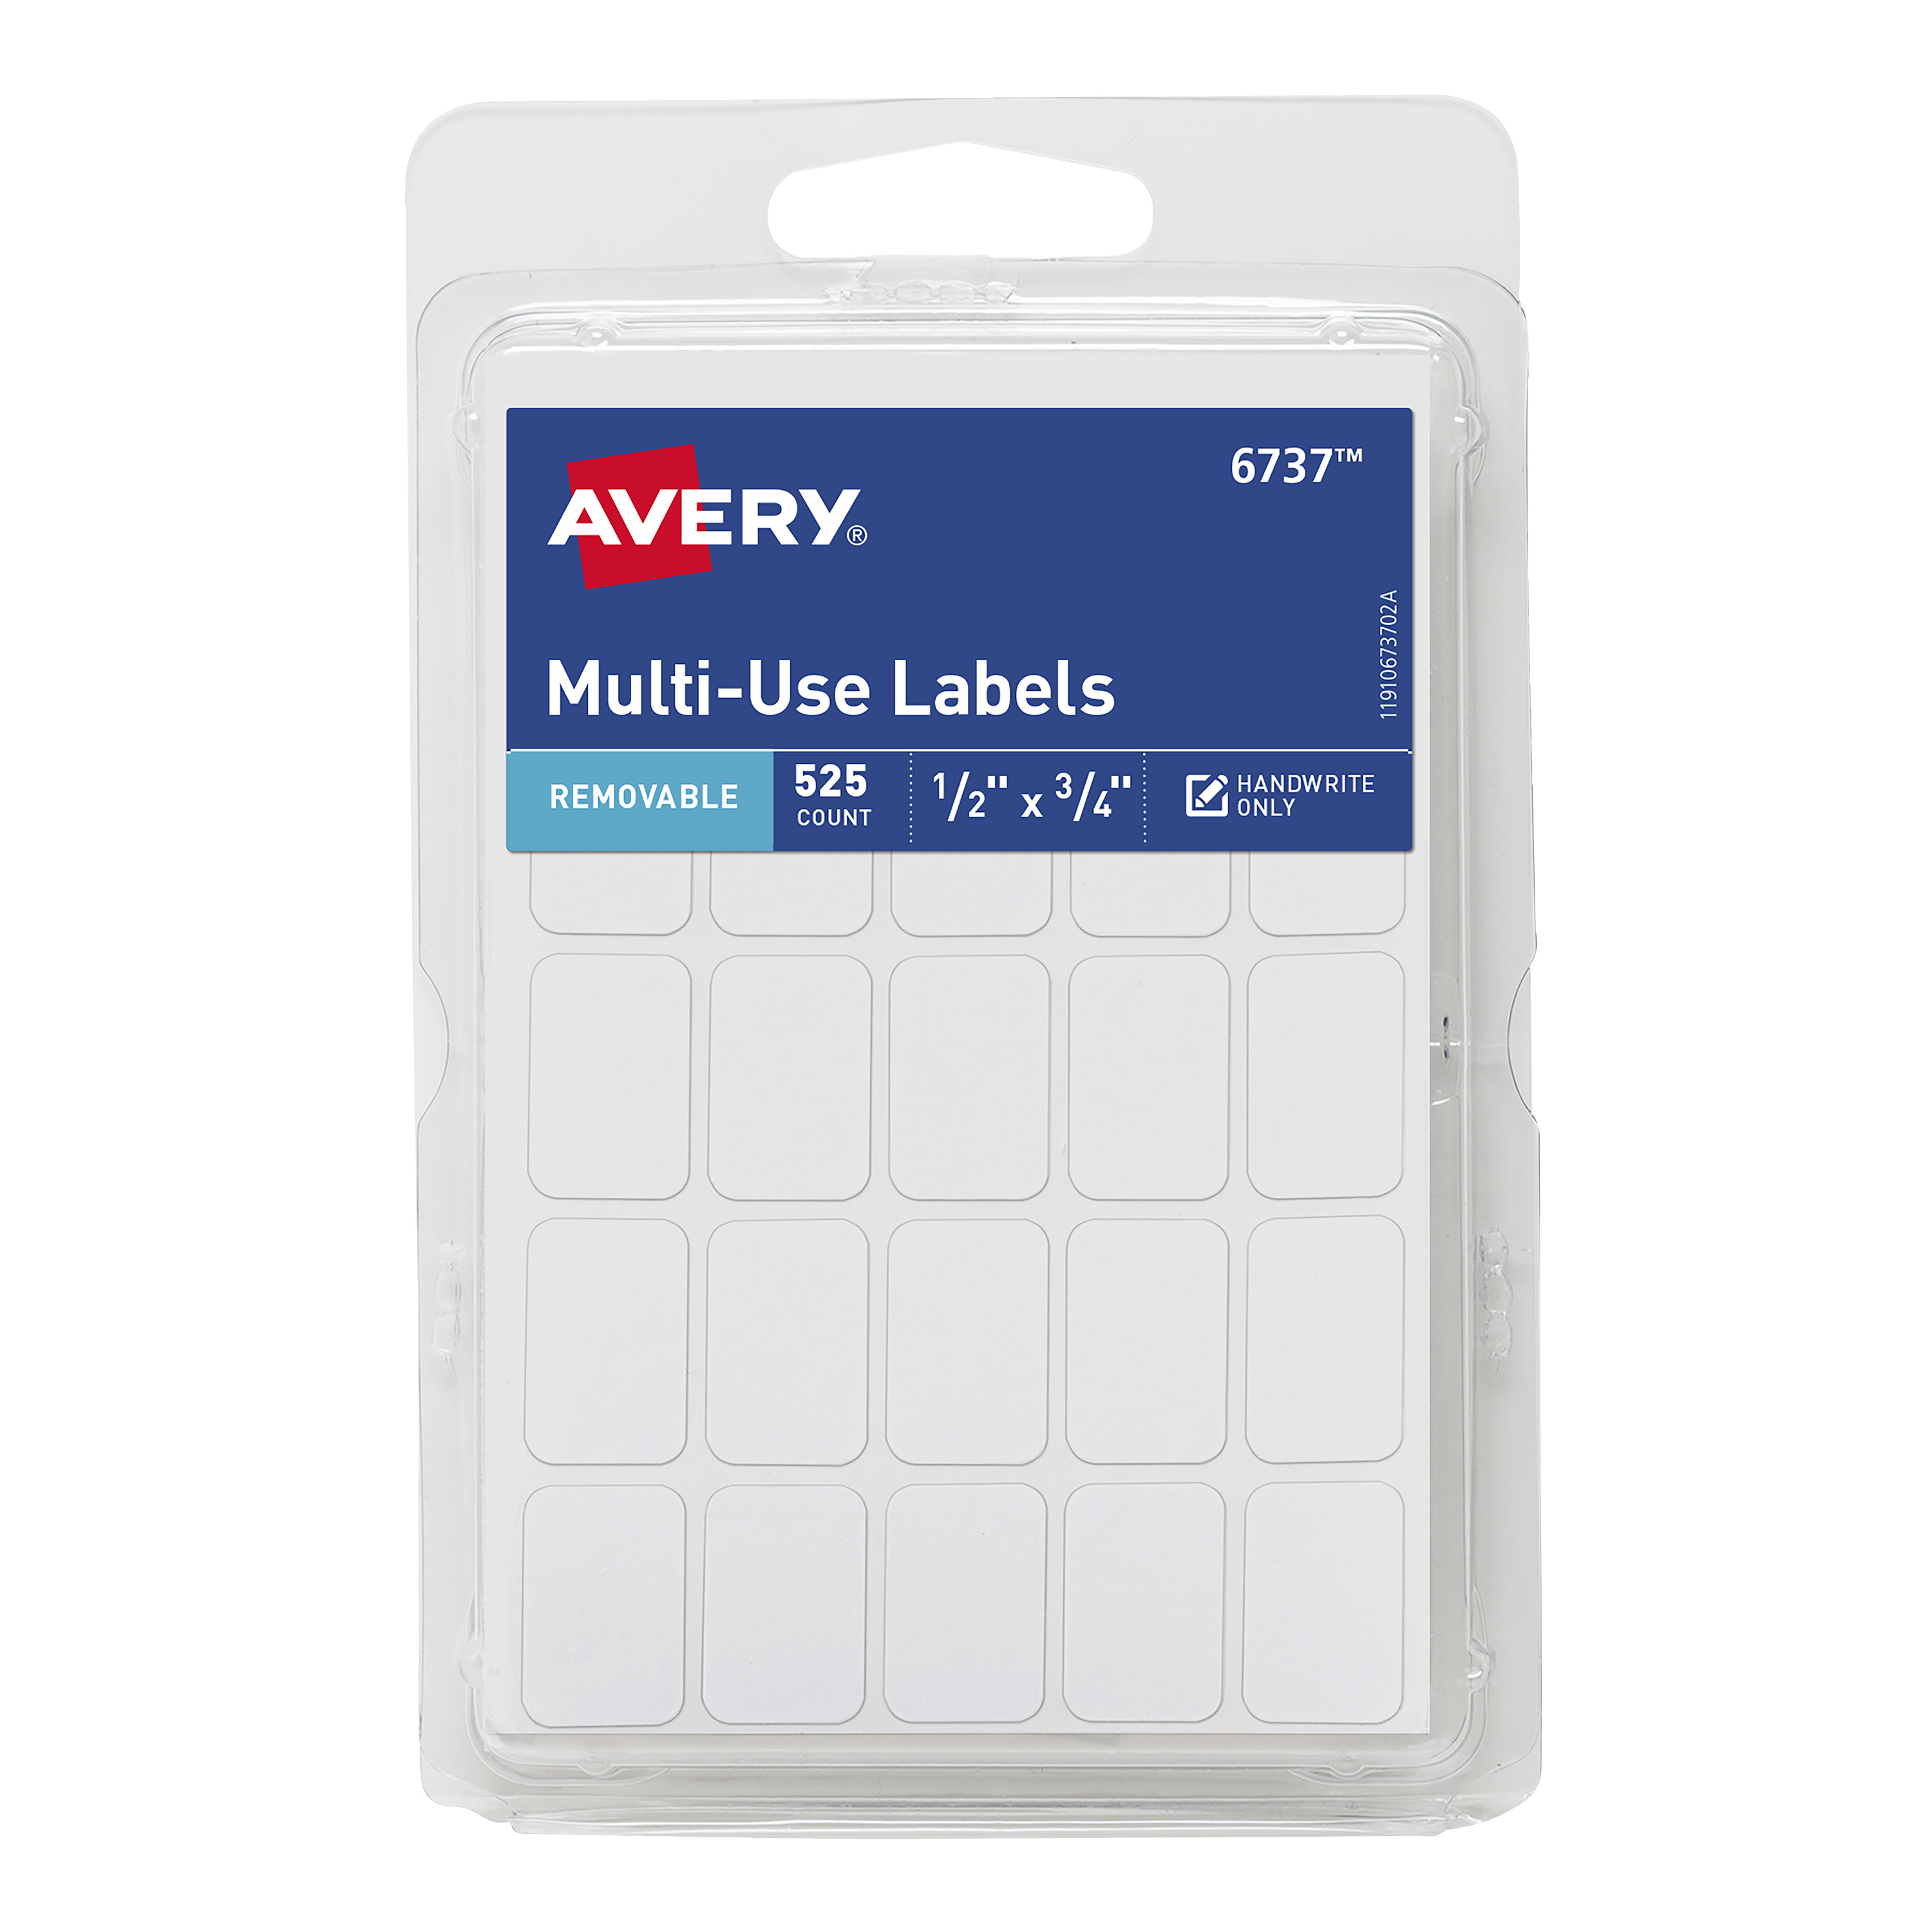 Avery Multi-Use Labels, White, 1/2" x 3/4", Removable, Handwrite, 525 Labels 0.071 lb (16737) - image 1 of 6